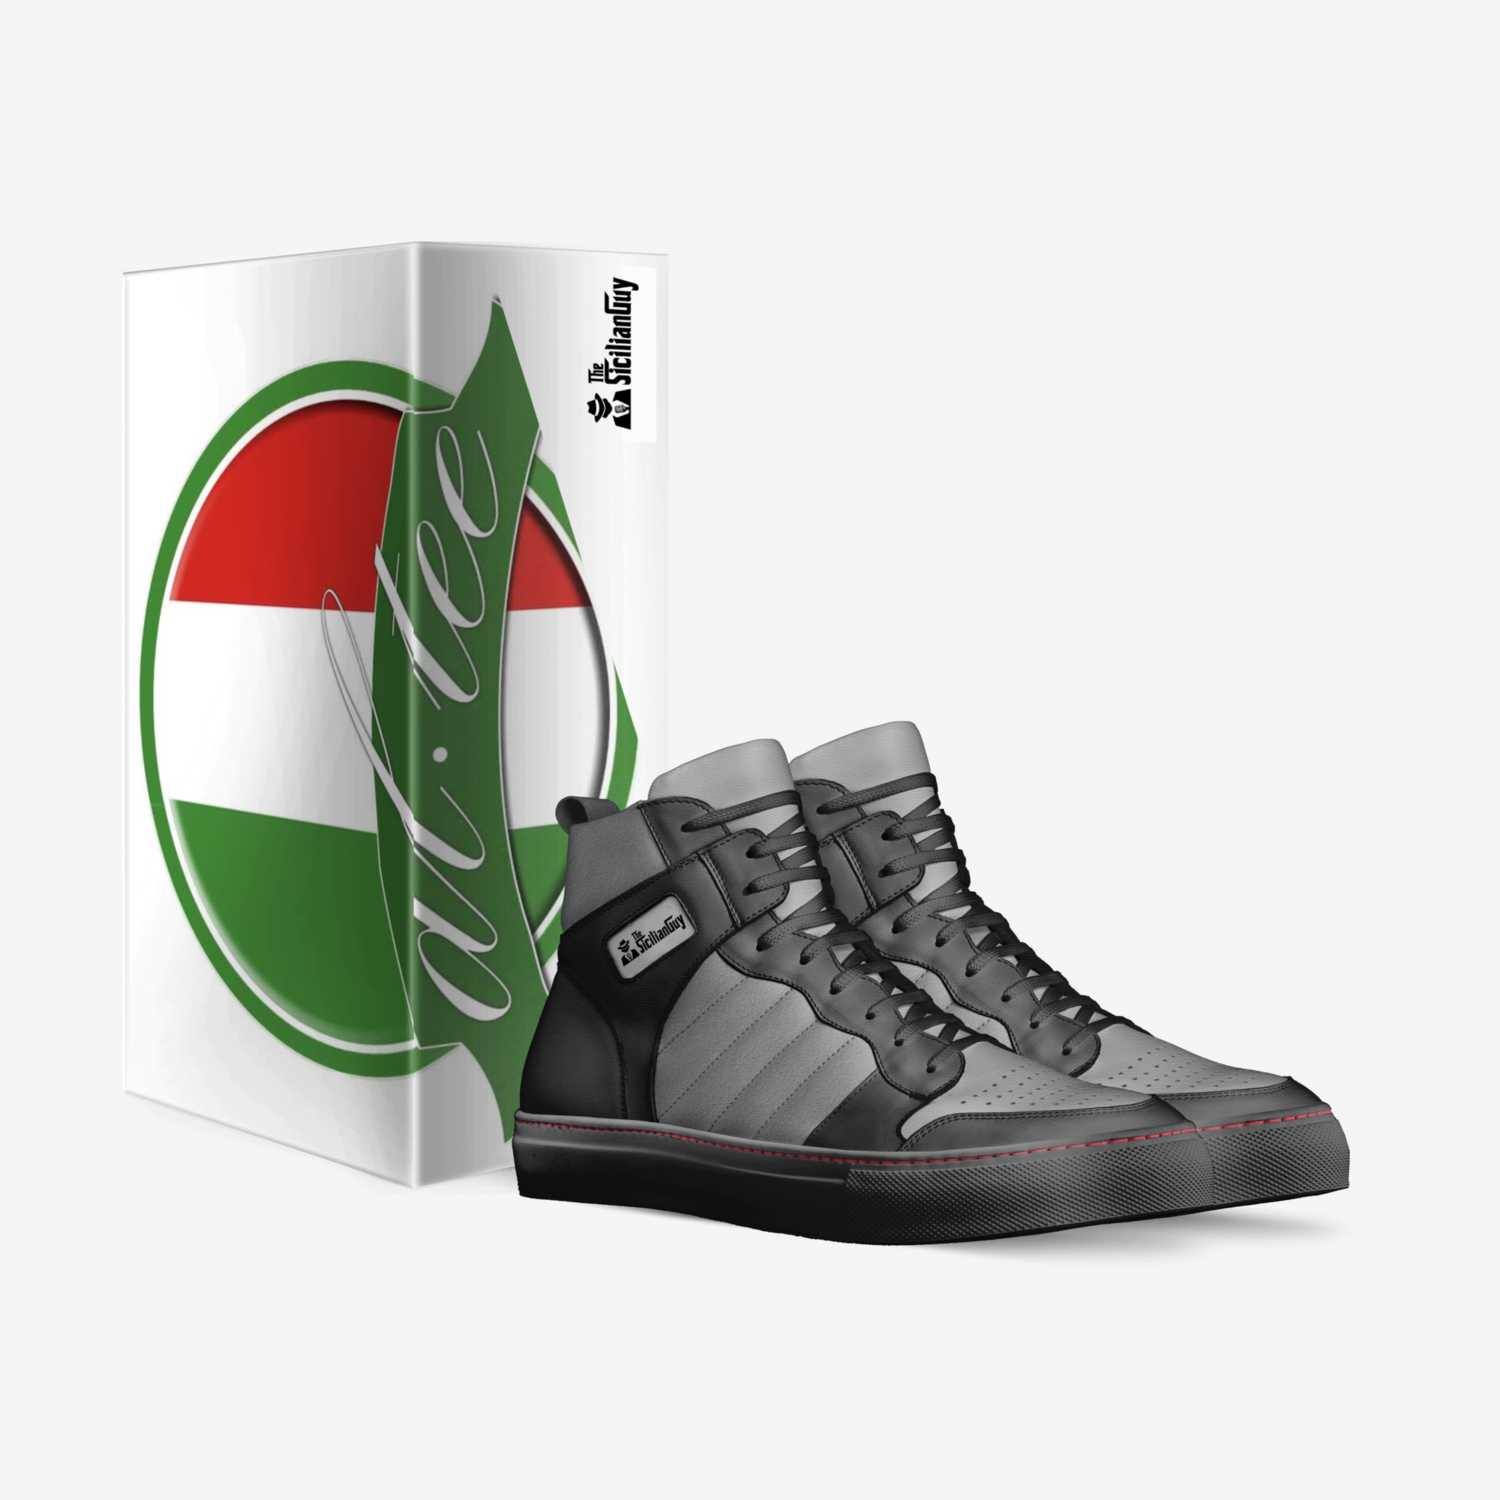 Al Tee custom made in Italy shoes by Alessio Terrana | Box view